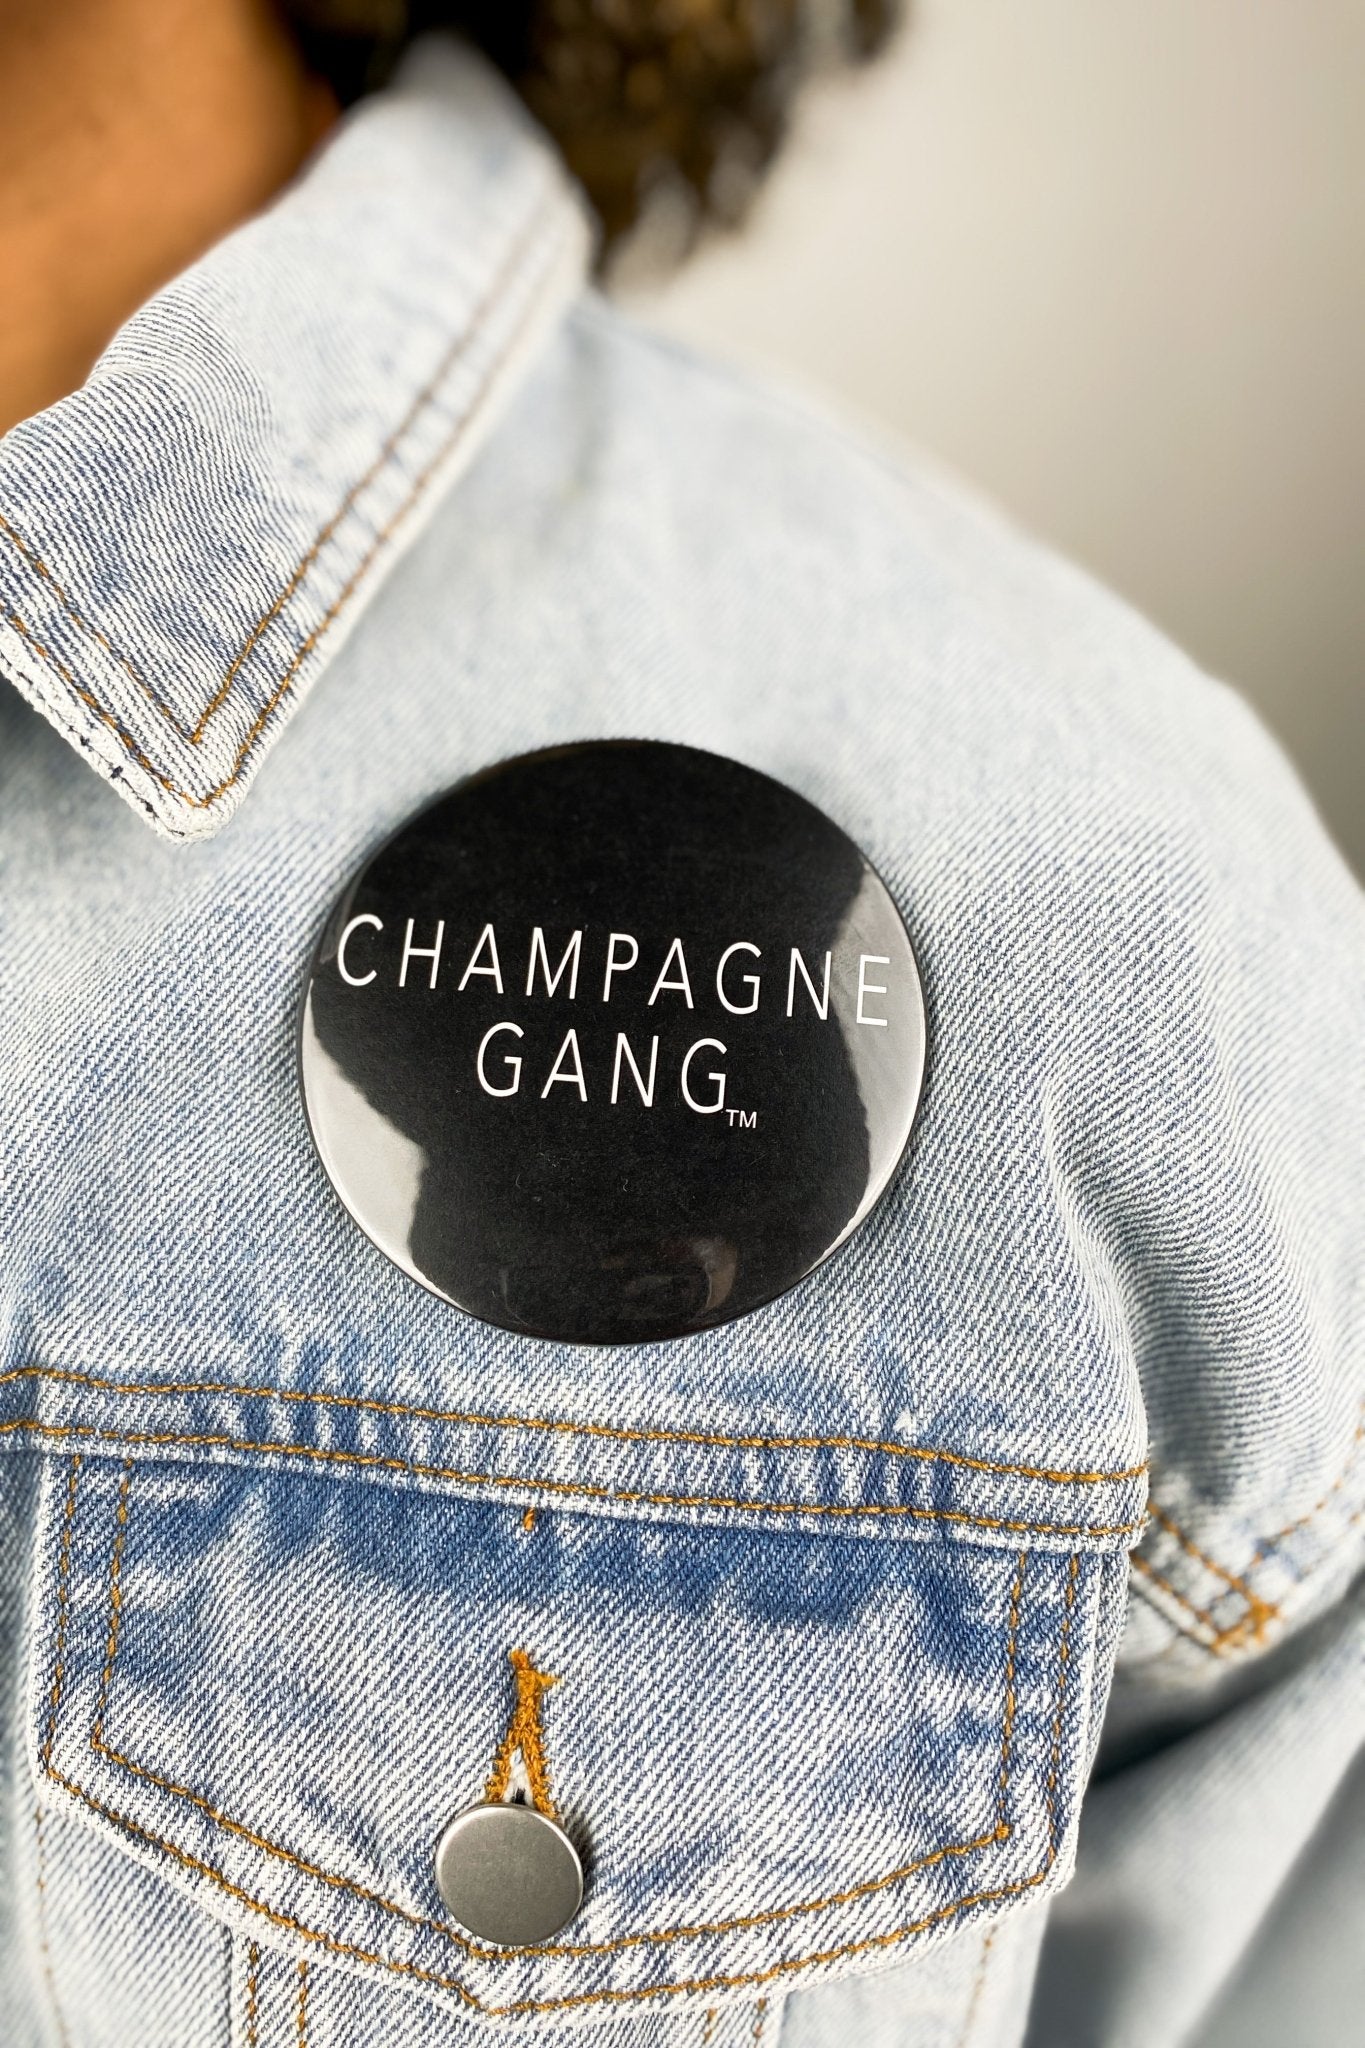 Champagne gang 3 inch button - Stylish button -  Cute Bridal Collection at Lush Fashion Lounge Boutique in Oklahoma City